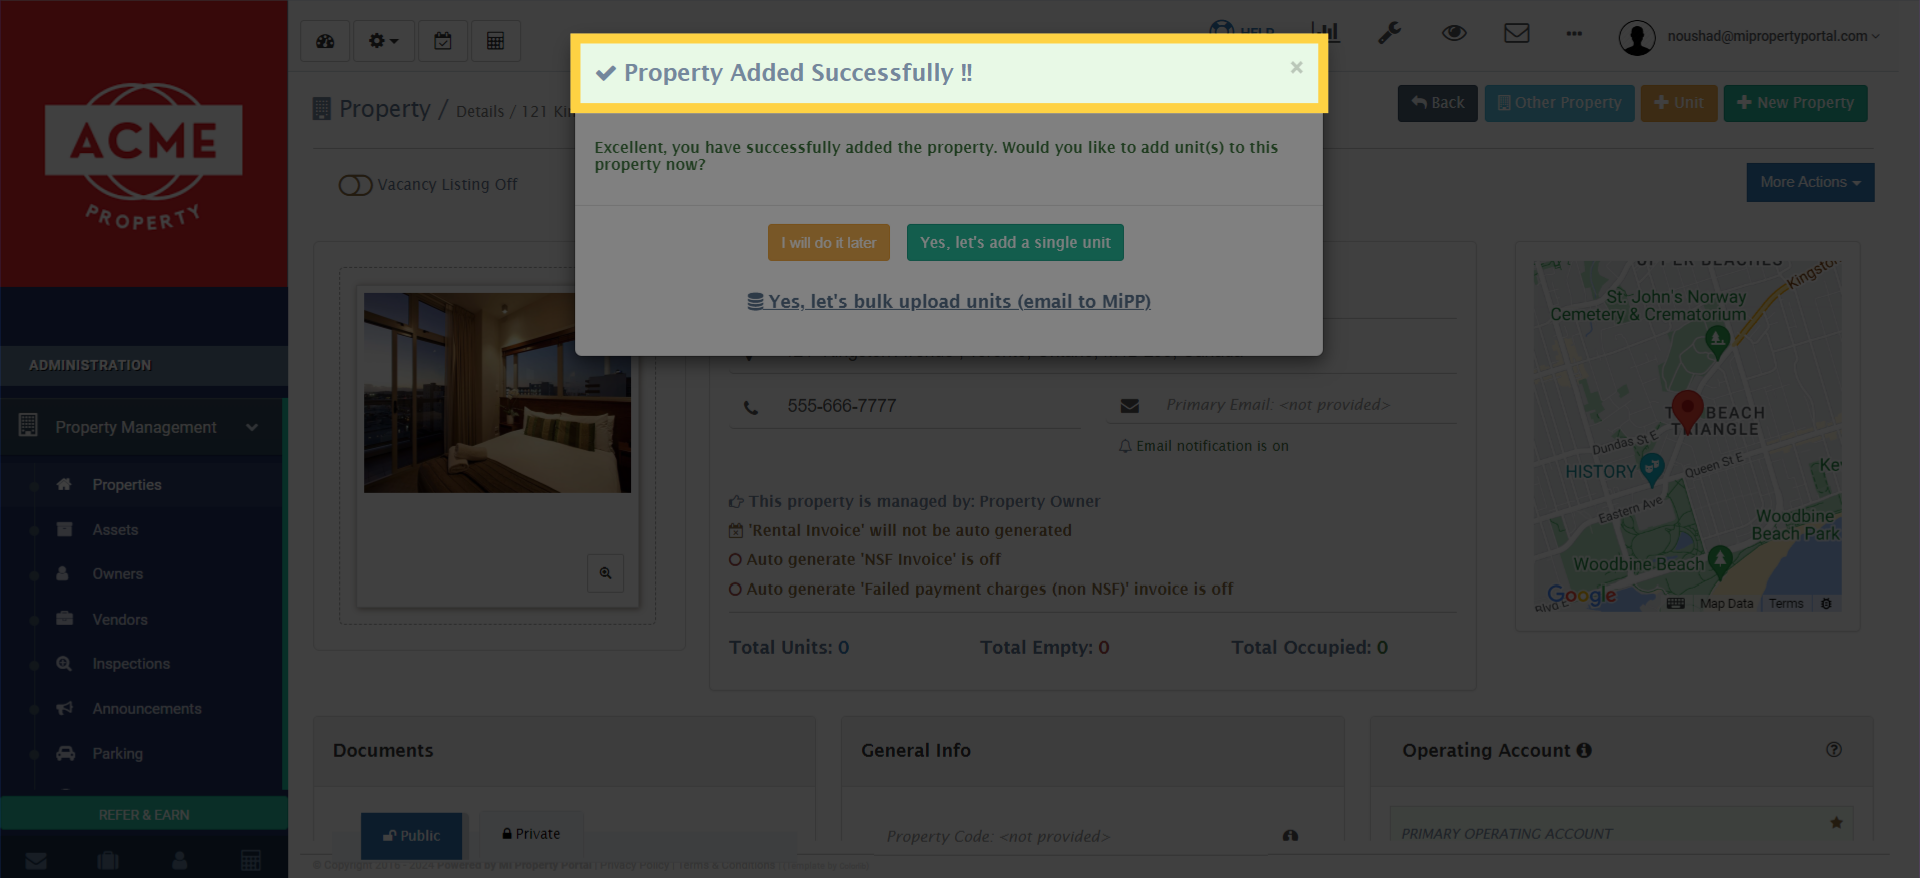  'Property Added Successfully !!' Pop-up will appear 